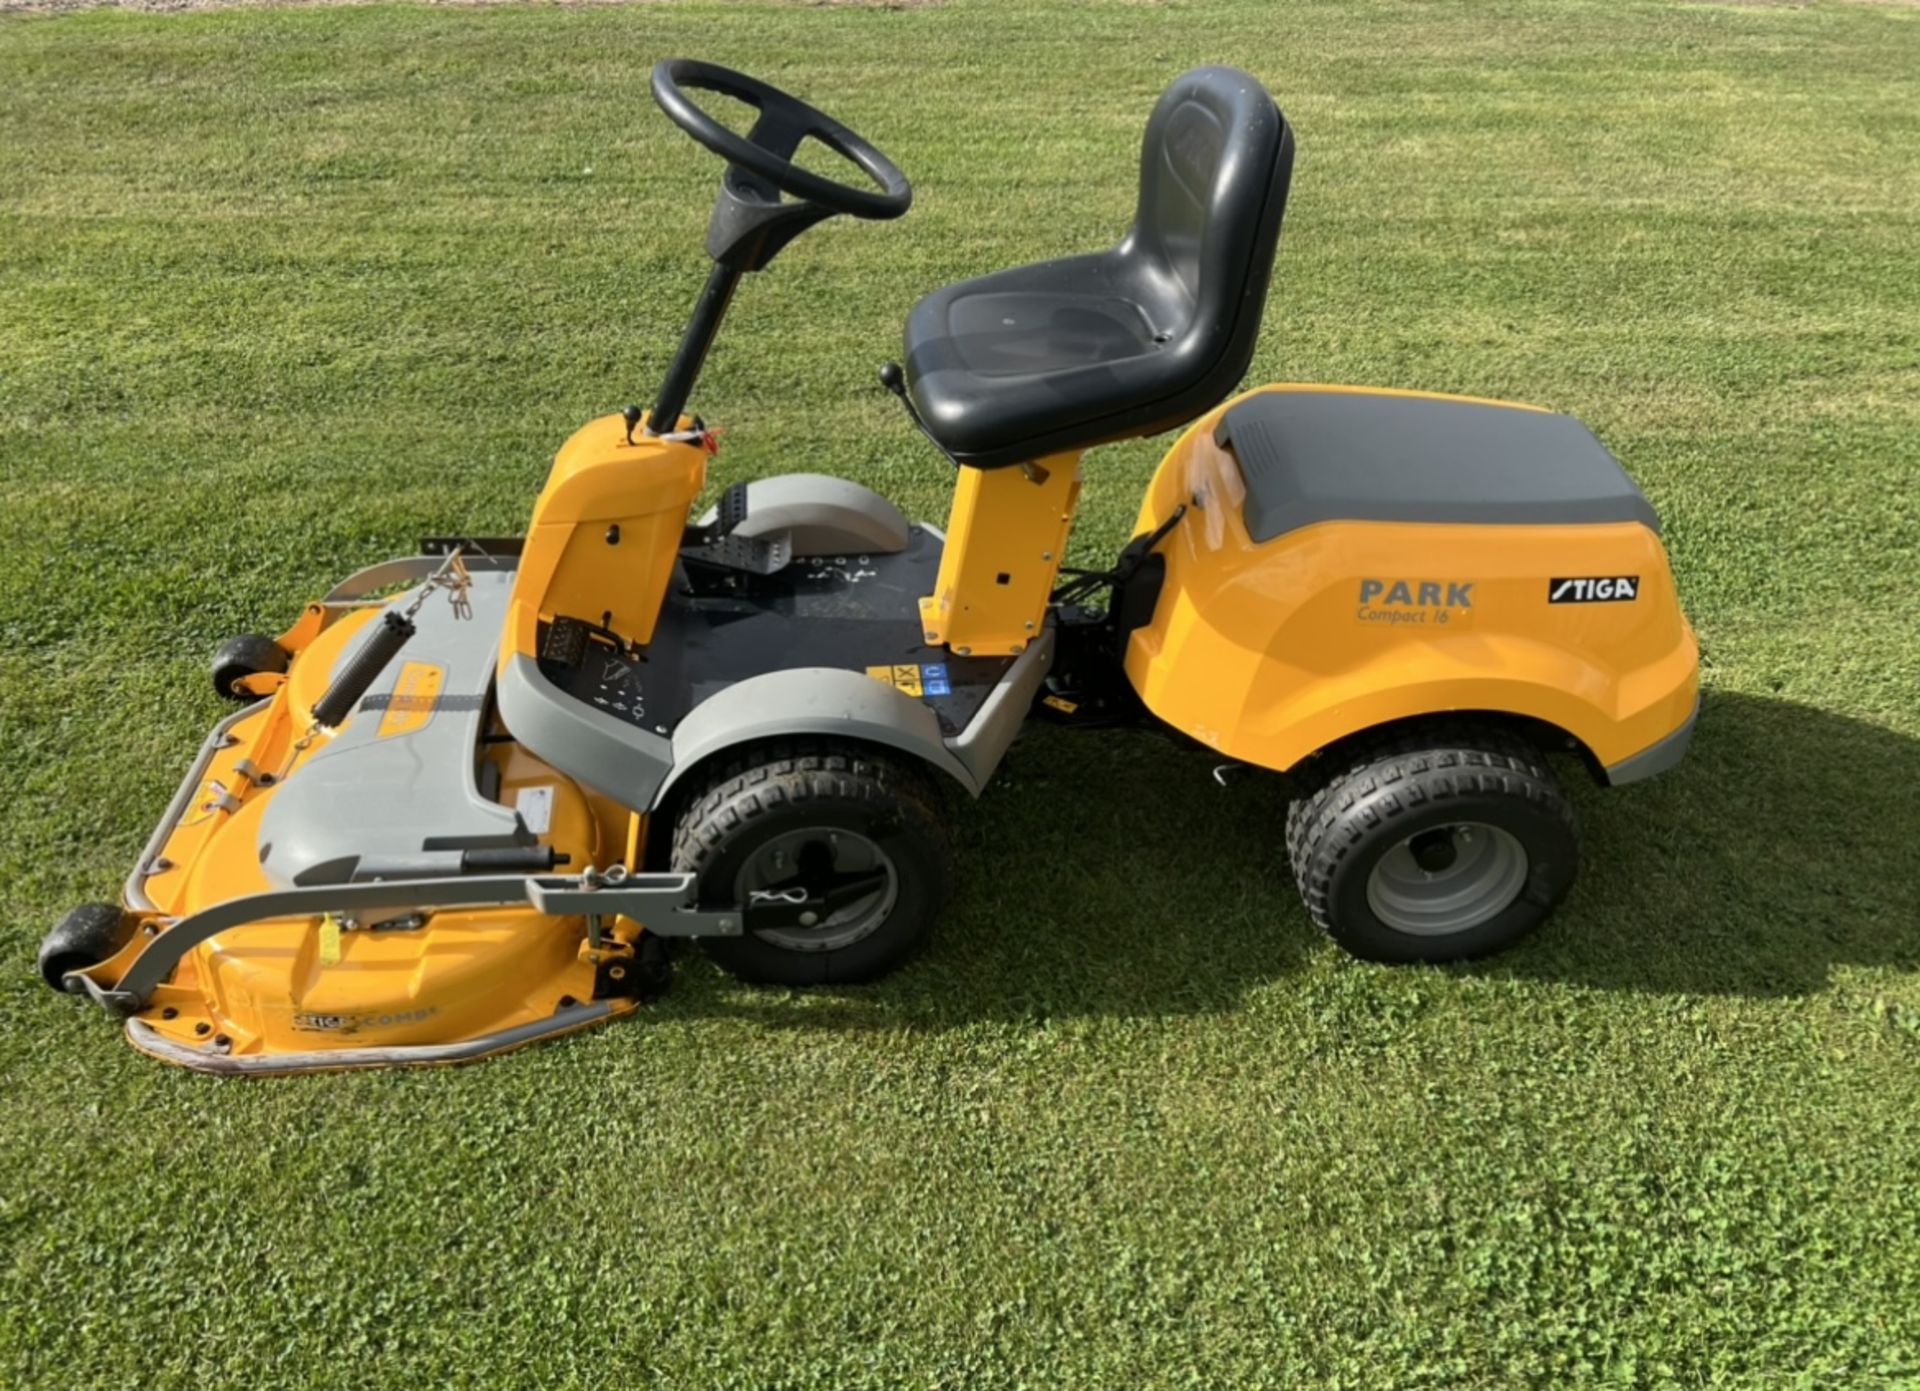 STIGA PARK COMPACT 16 RIDE ON MOWER OUTFRONT *LOCATION NORTH YORKSHIRE*